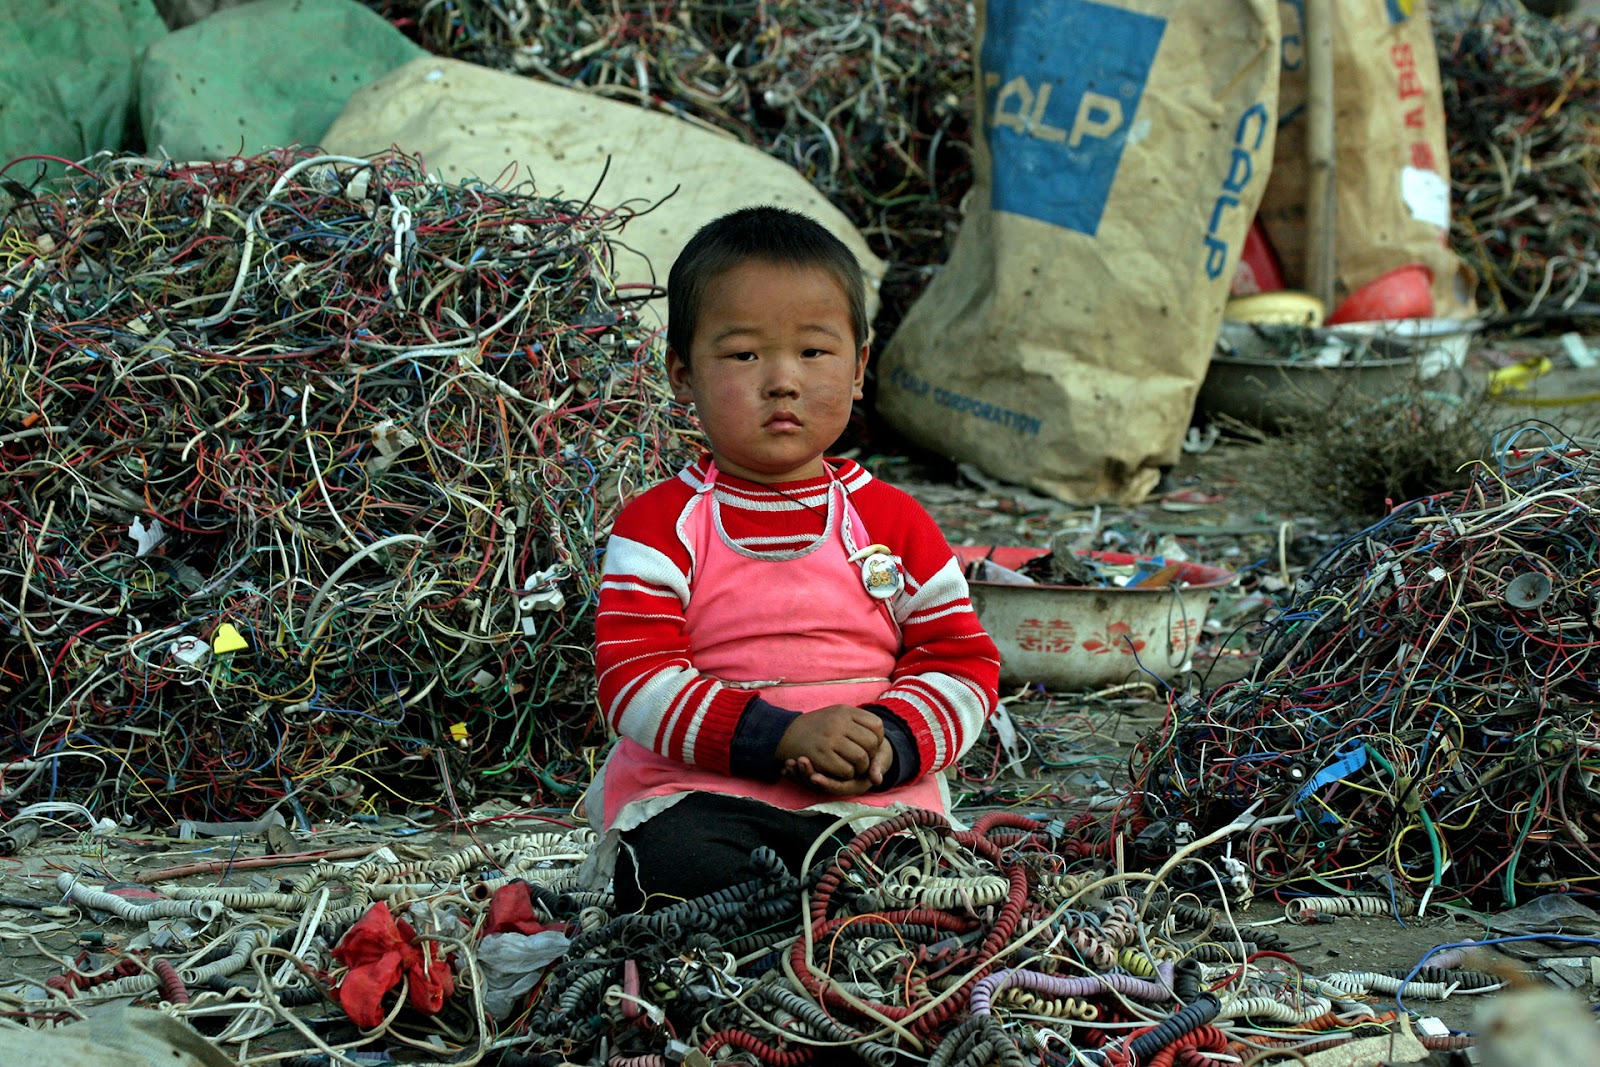 Toxics e-Waste Documentation in China. © Greenpeace / Natalie Behring